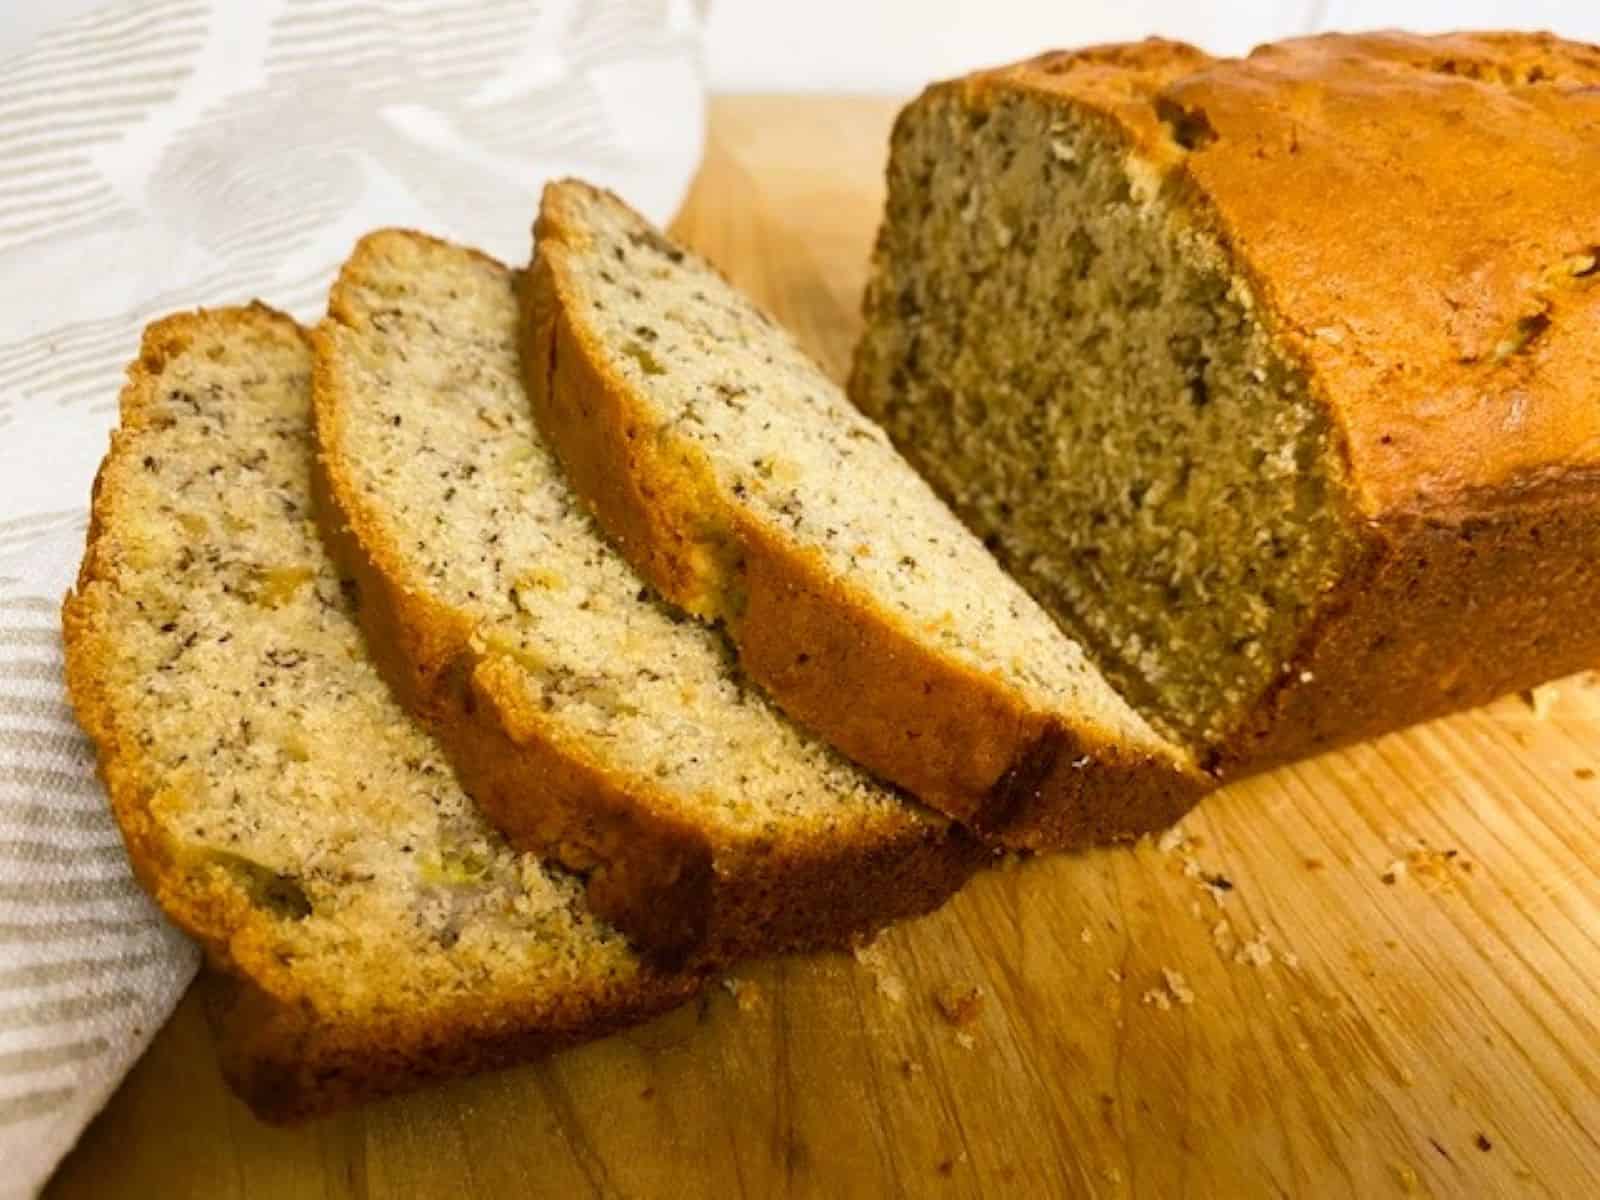 Craving carbs? Try one of these 13 delicious bread recipes!